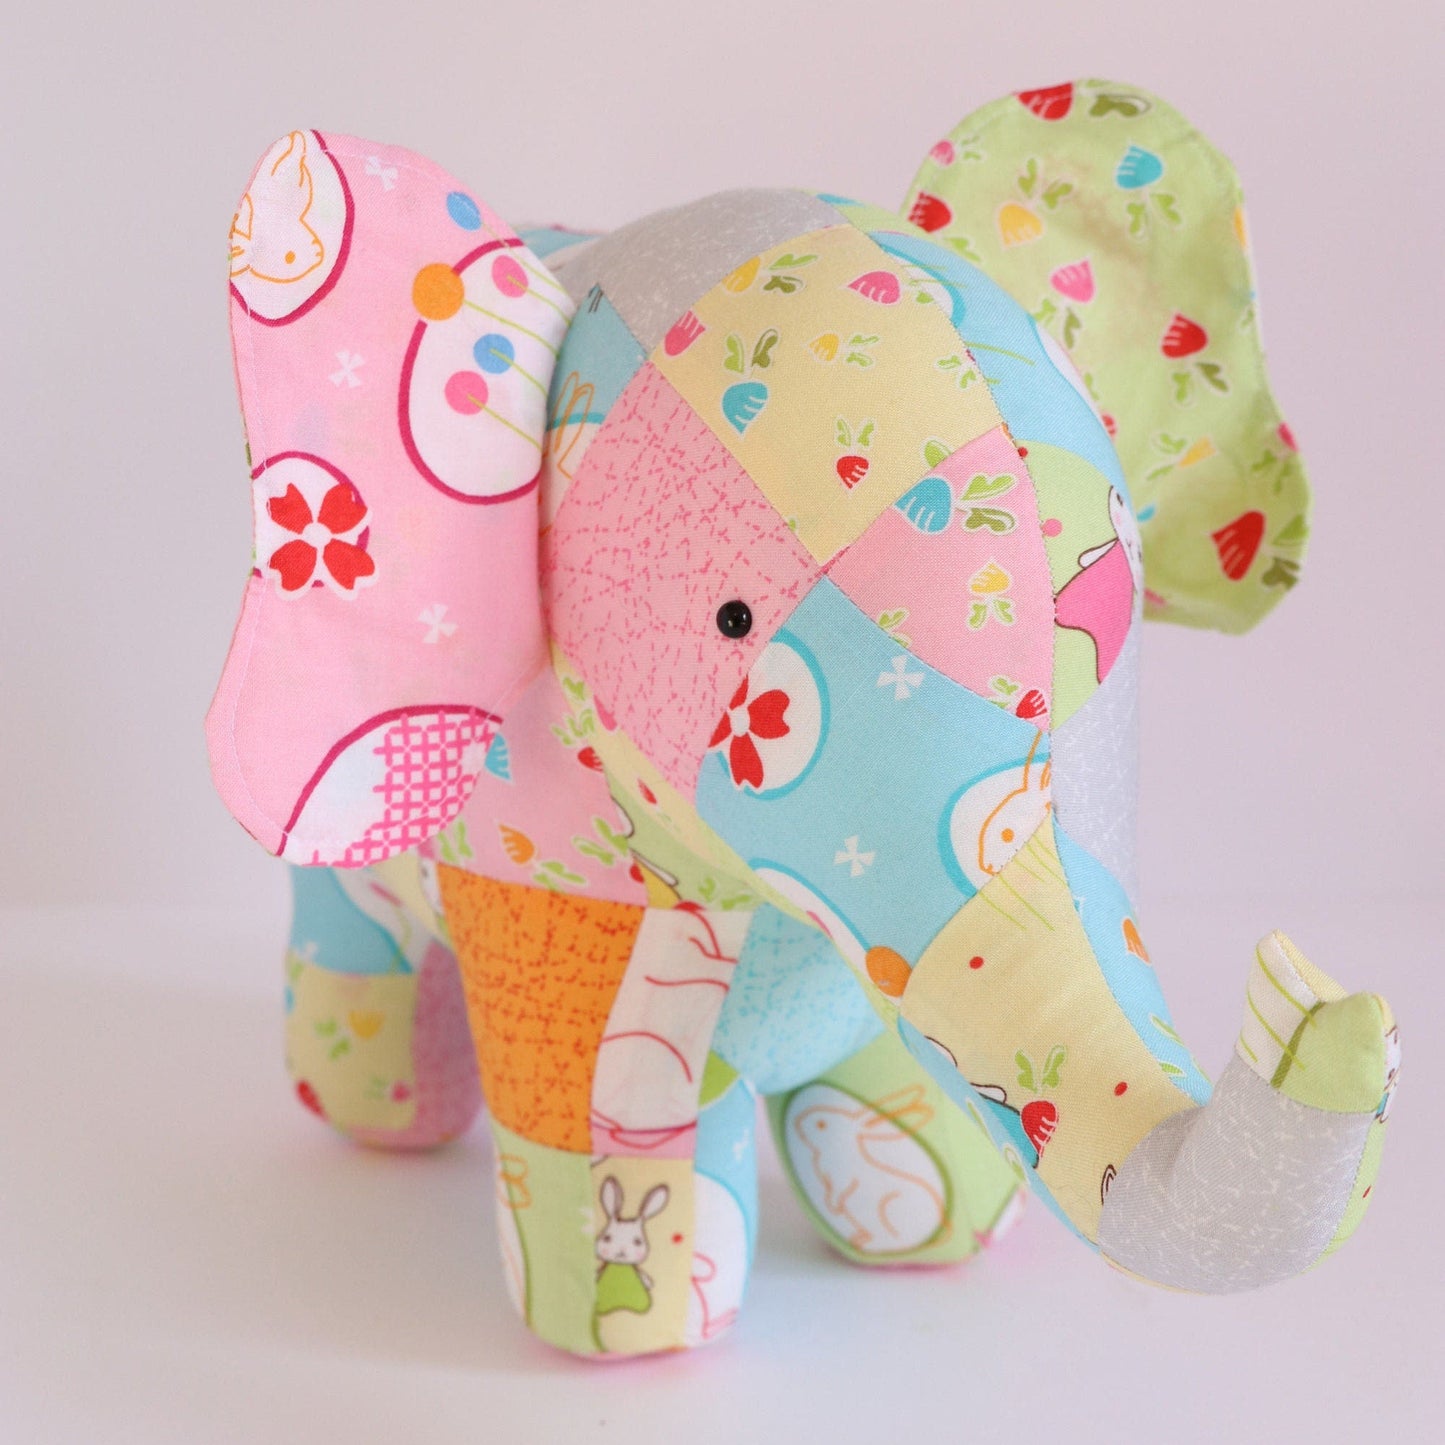 Adorable Elephant Decor Template with Step-by-Step Instructions - Create a Charming Craft!